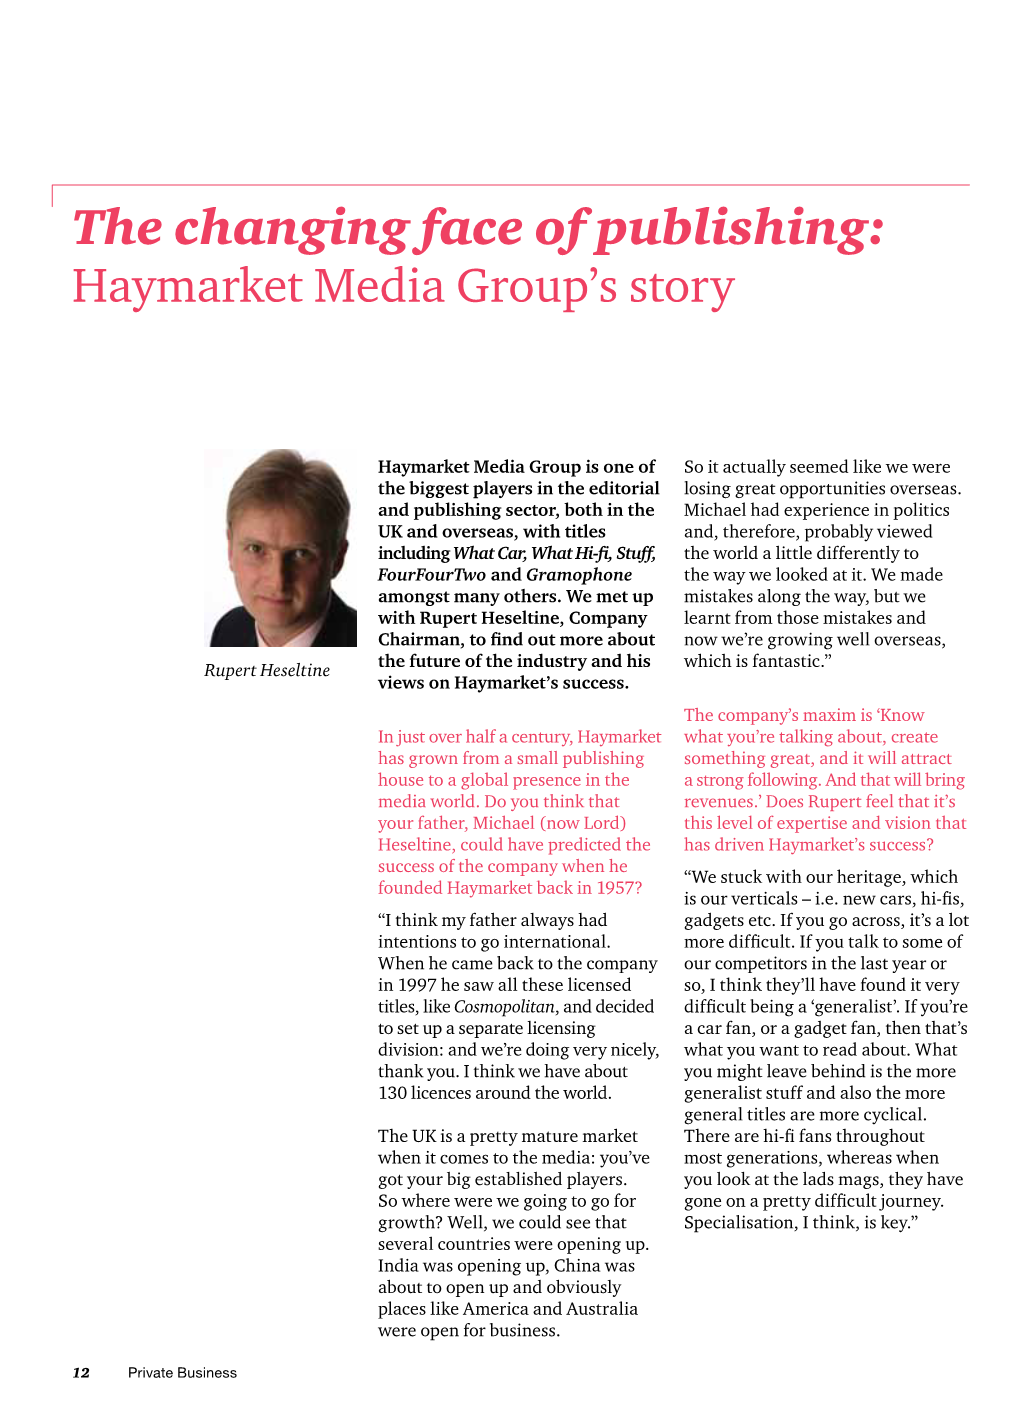 The Changing Face of Publishing: Haymarket Media Group's Story, Private Business, November 2010 Issue